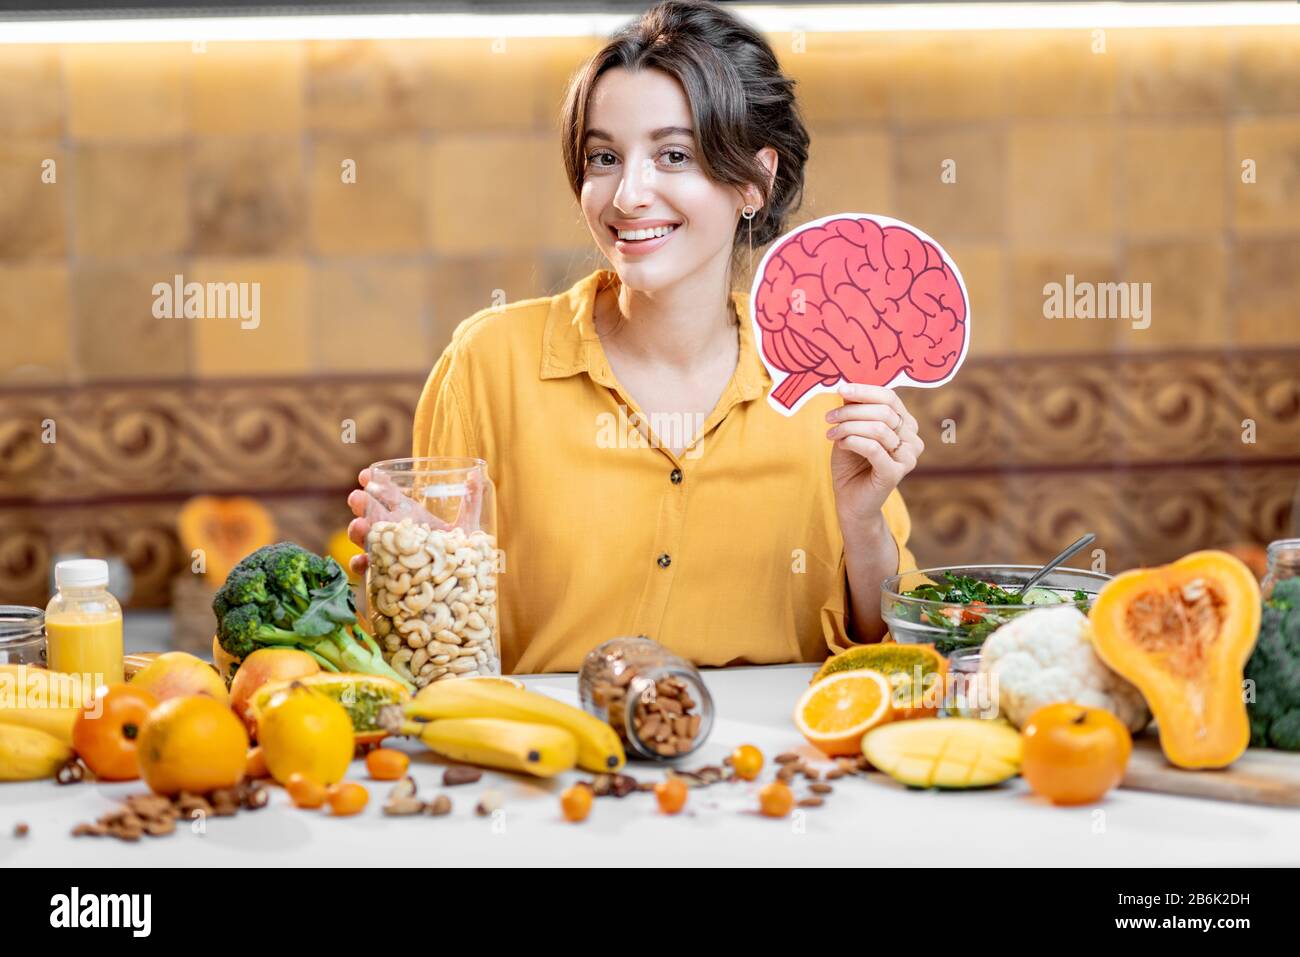 Woman holding human brain model with variety of healthy fresh food on the table. Concept of balanced nutrition for brain health Stock Photo